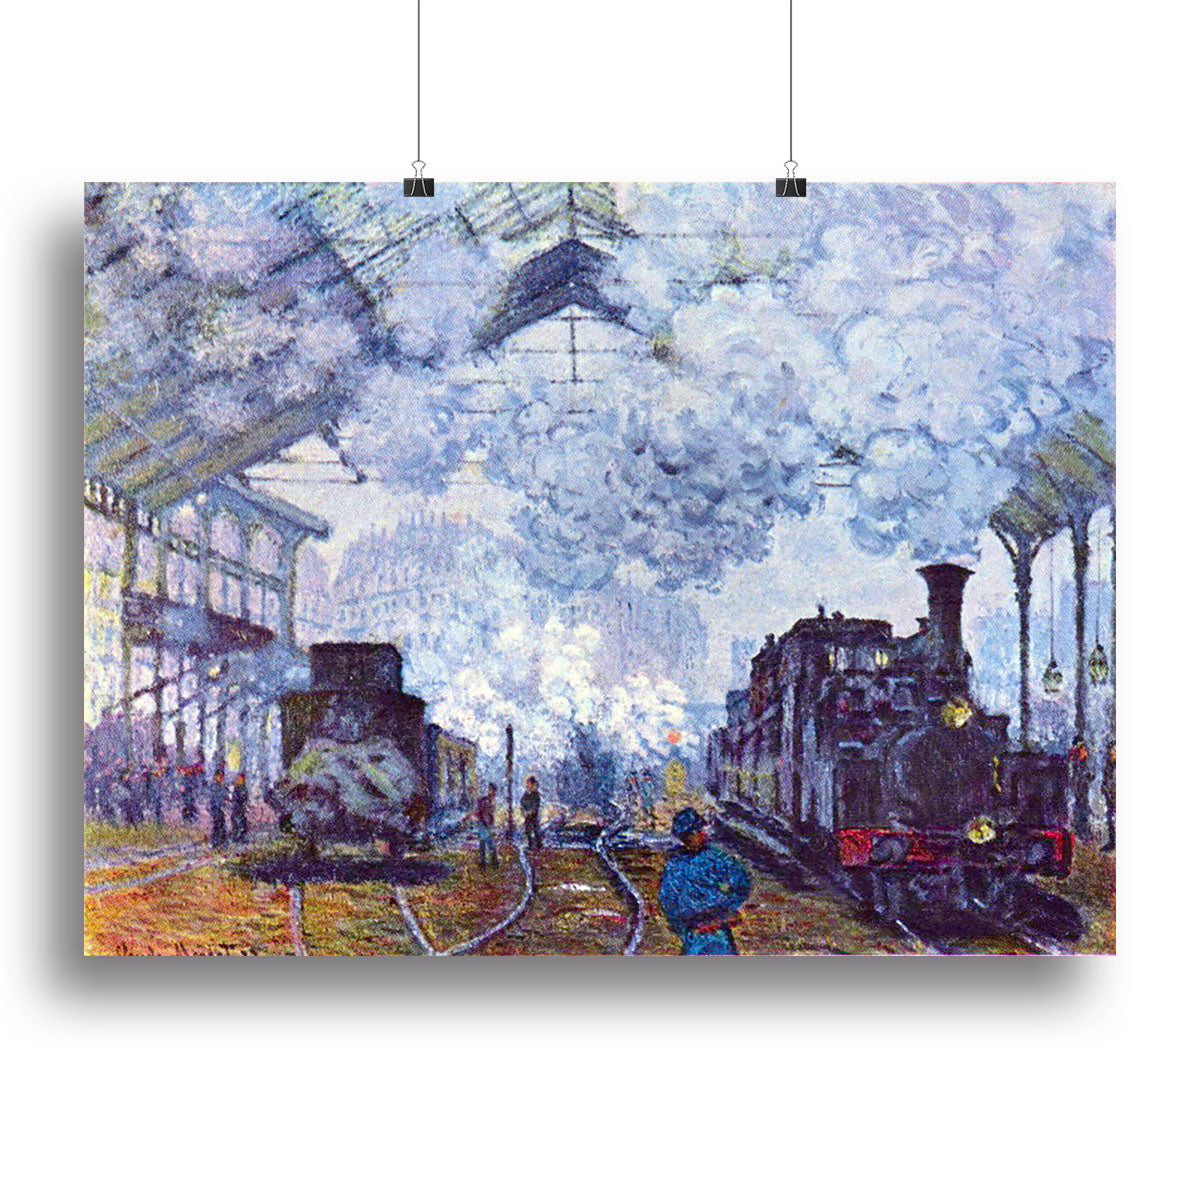 Saint Lazare station in Paris arrival of a train by Monet Canvas Print or Poster - Canvas Art Rocks - 2